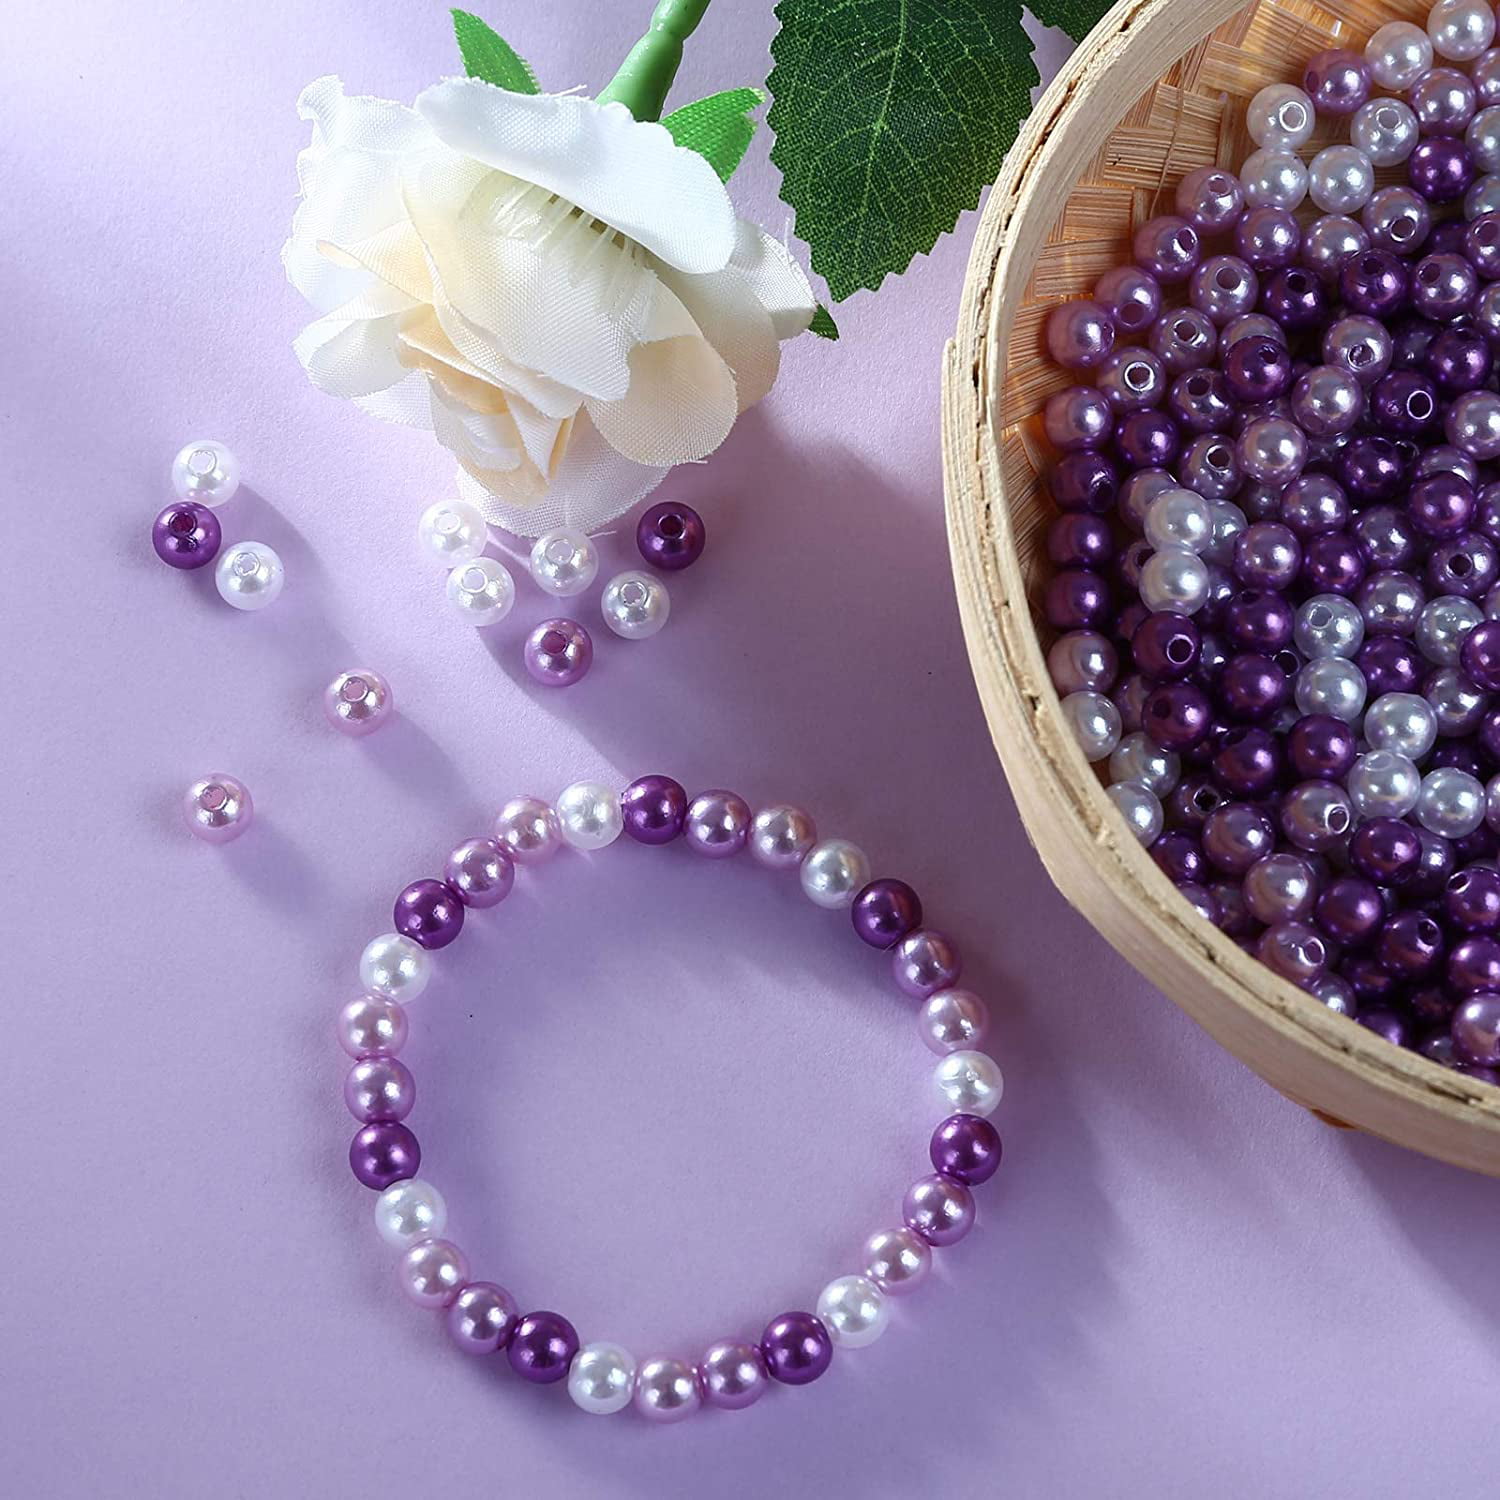 Naler 500pcs Art Pearls, Size 6mm Pearl Beads Charms for Art Craft Decorations Jewellery Making DIY, 4 Colors (Purple Series)